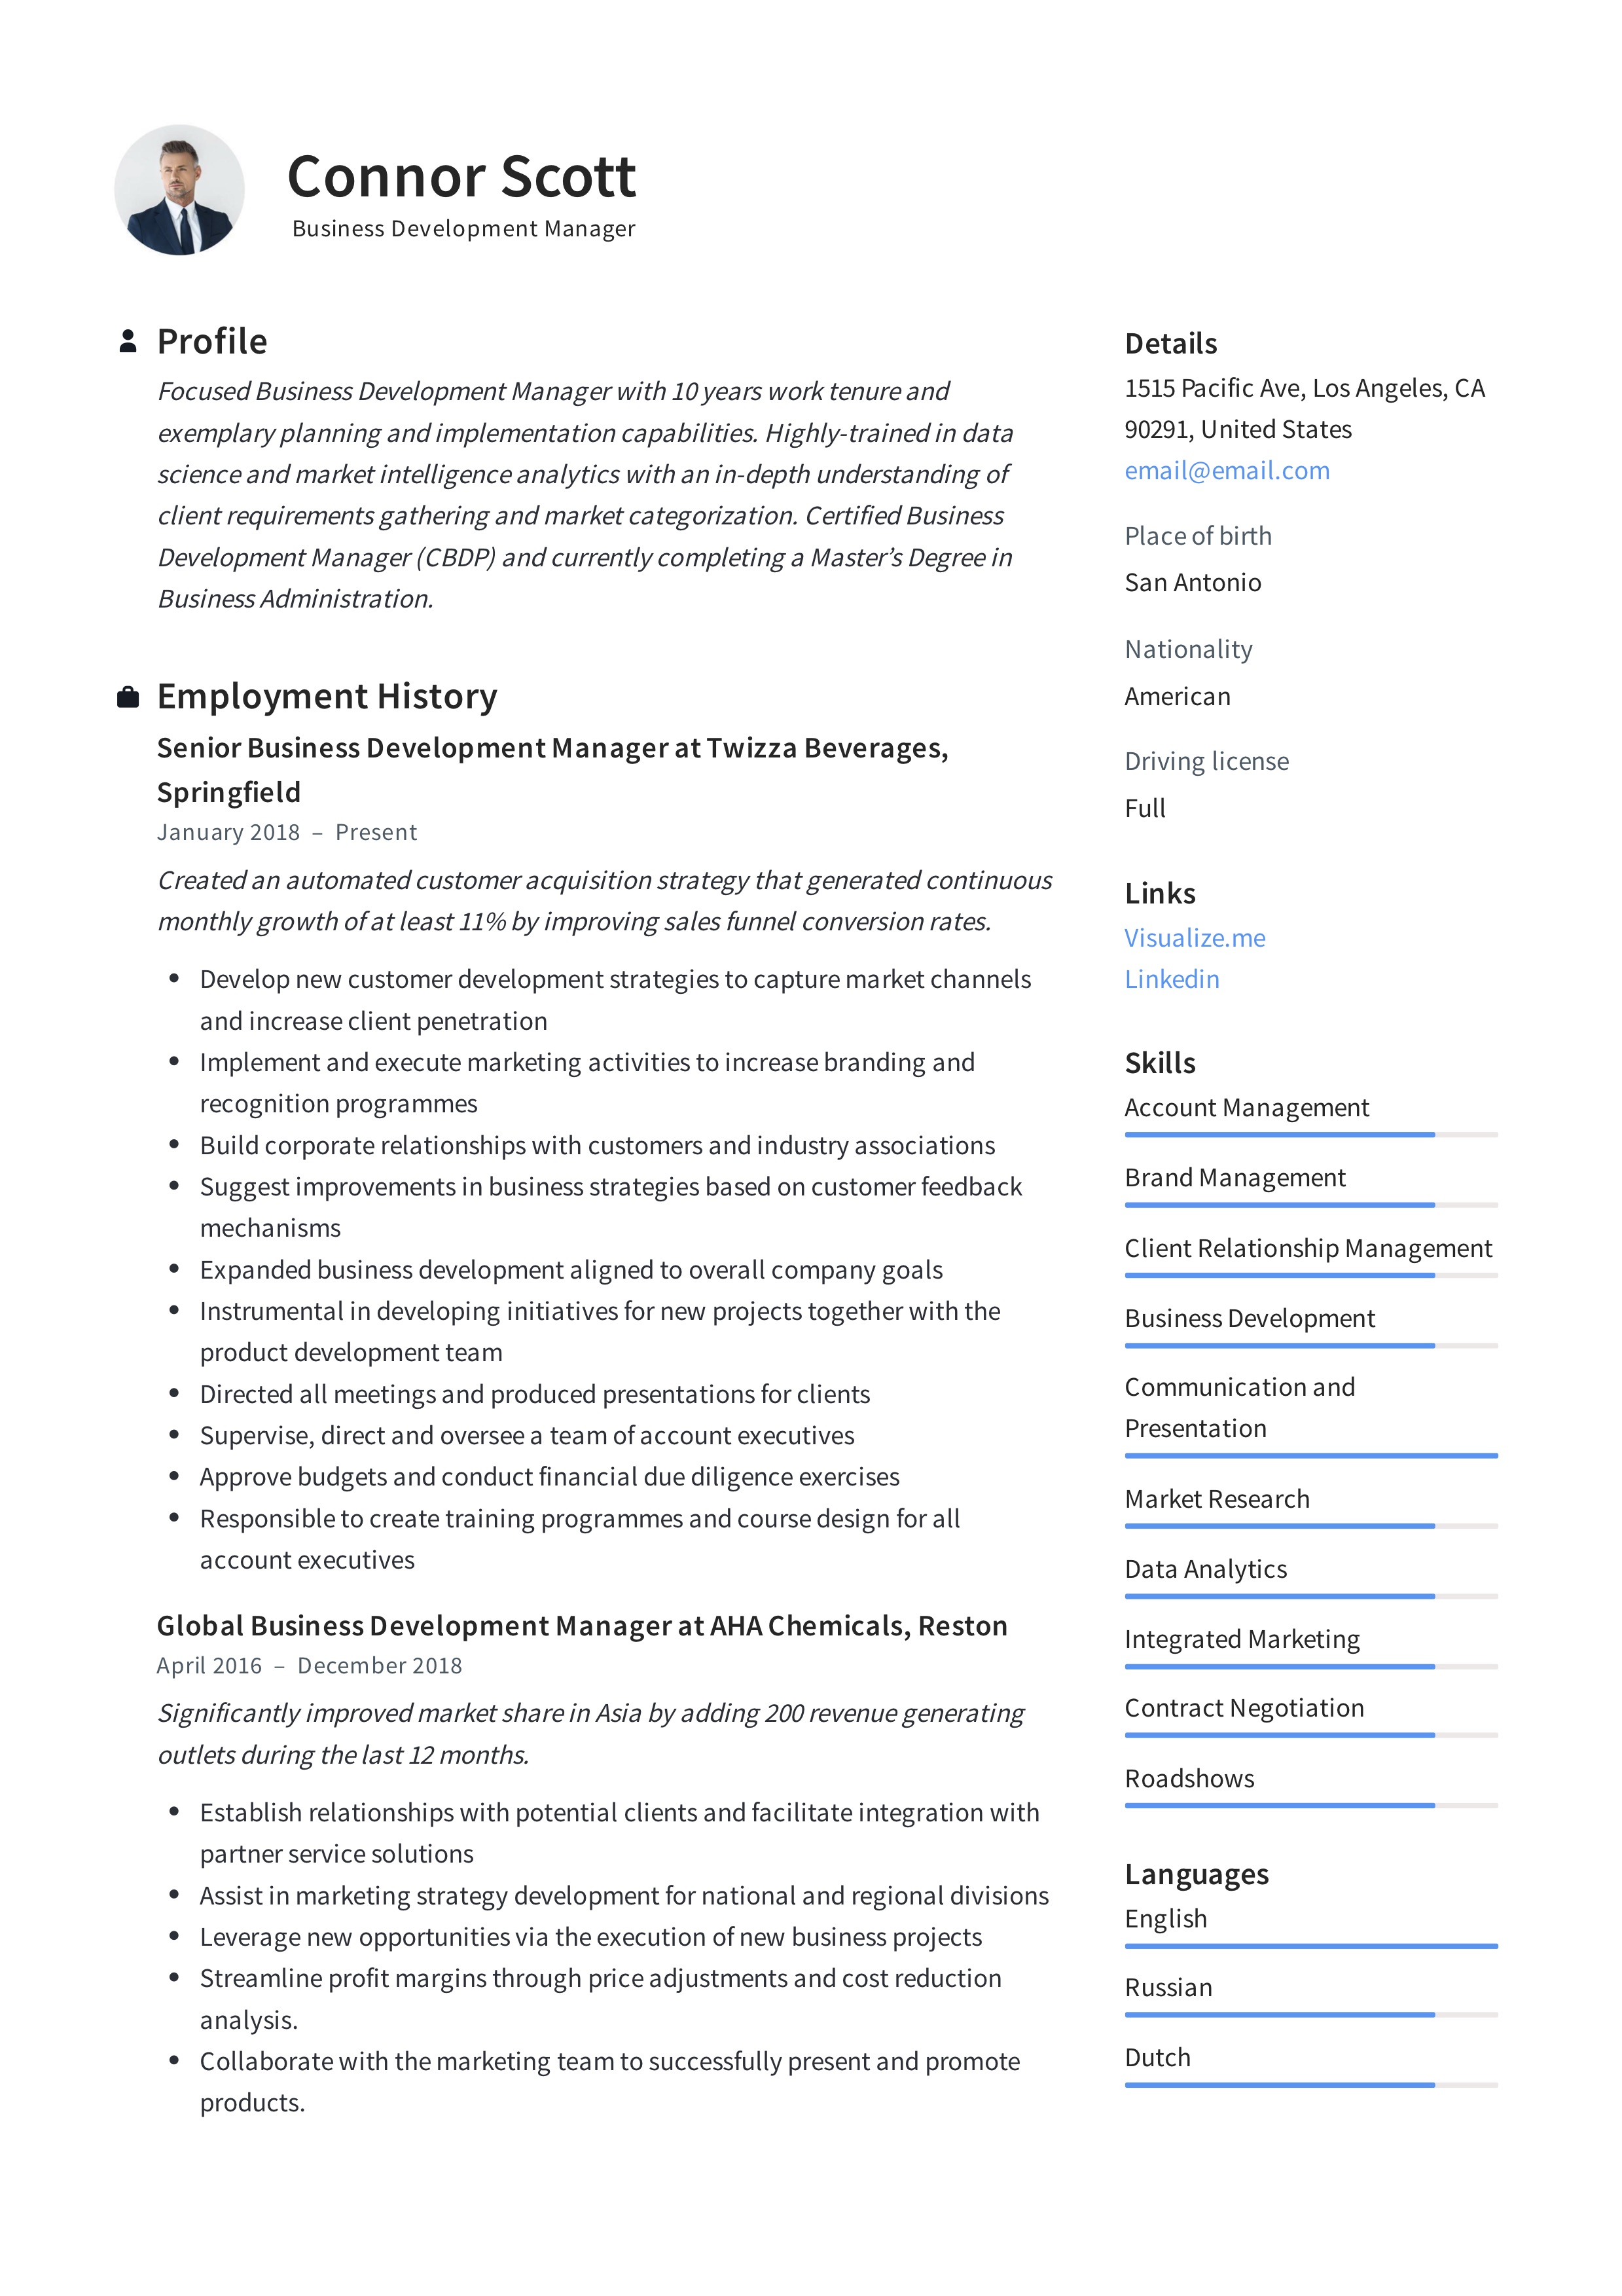 Business Development Manager Example Resume